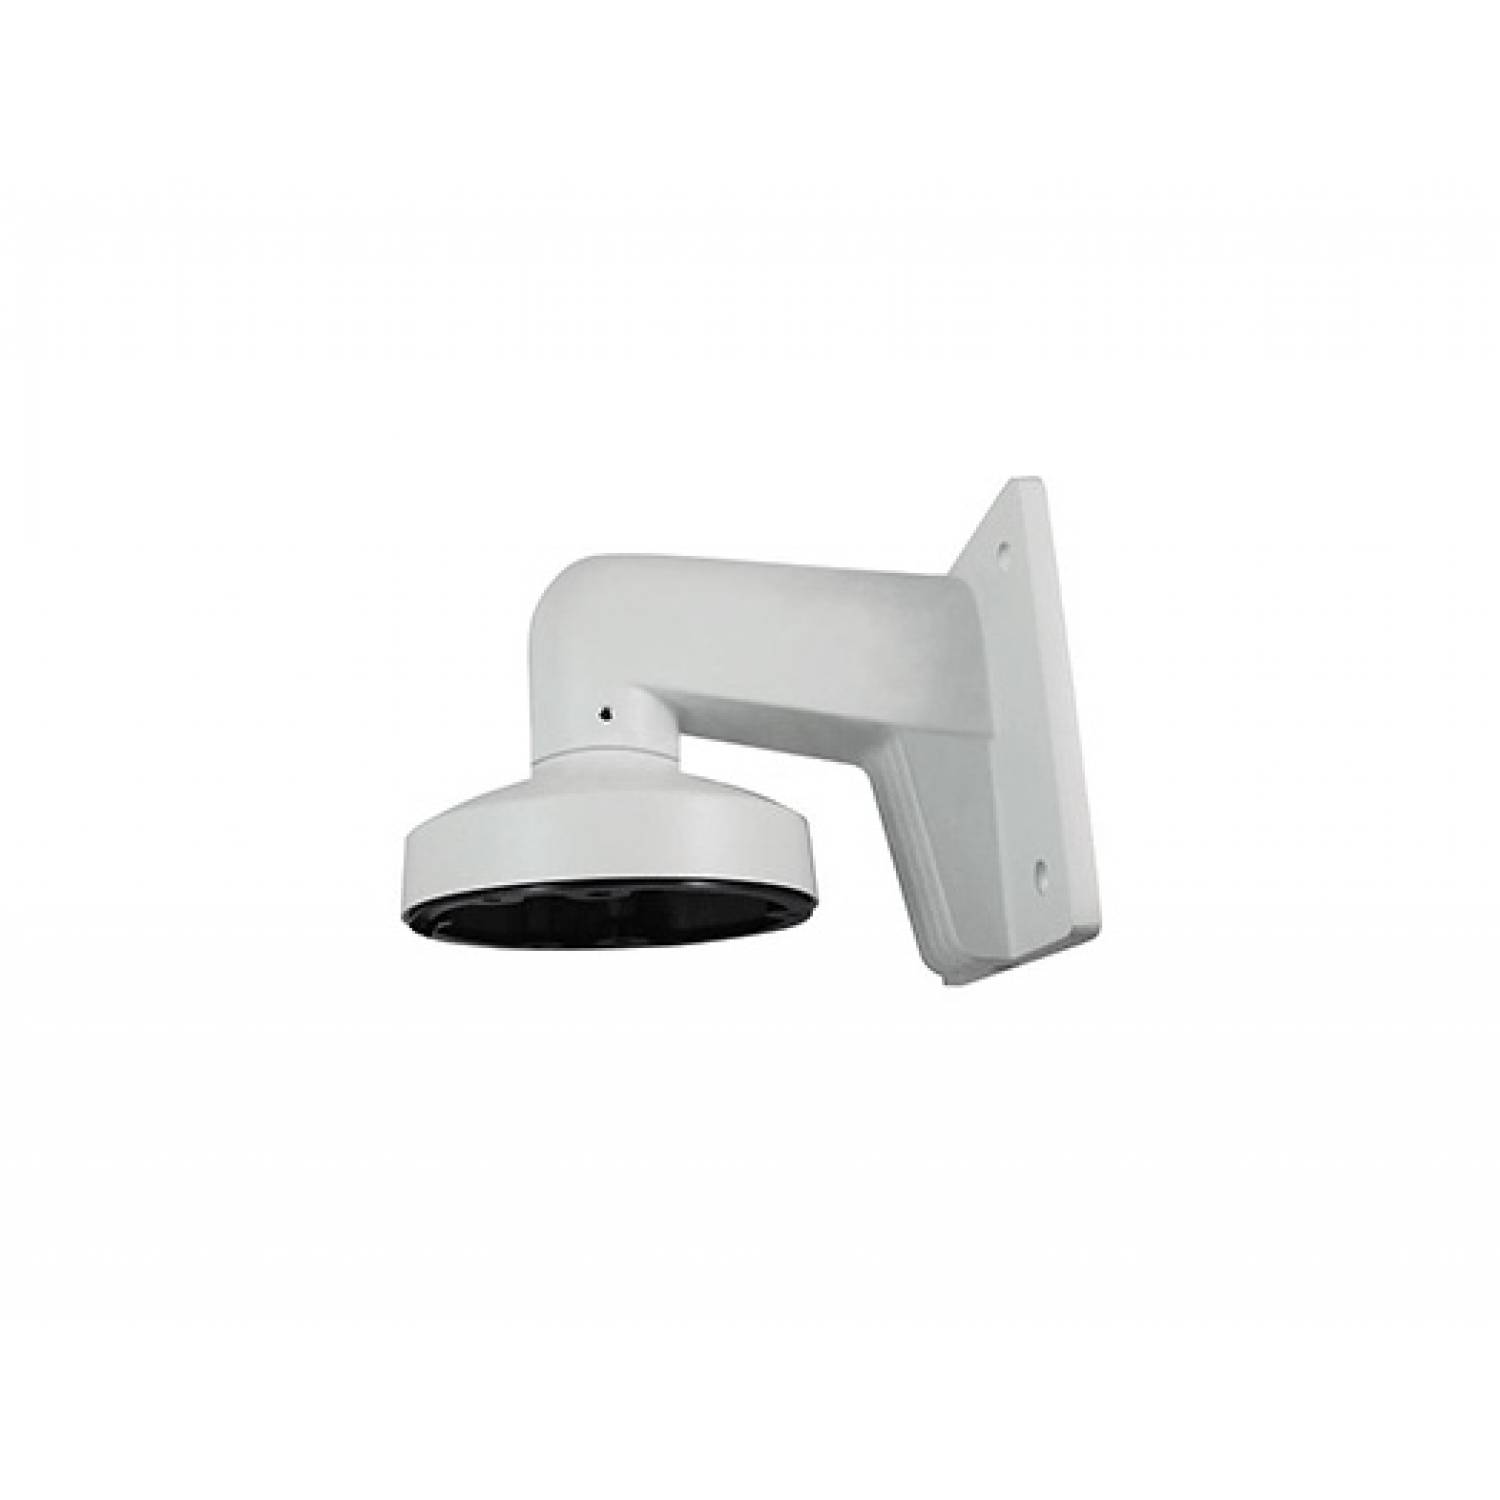 HikVision Wall Mount for Dome Camera DS-1272ZJ-110